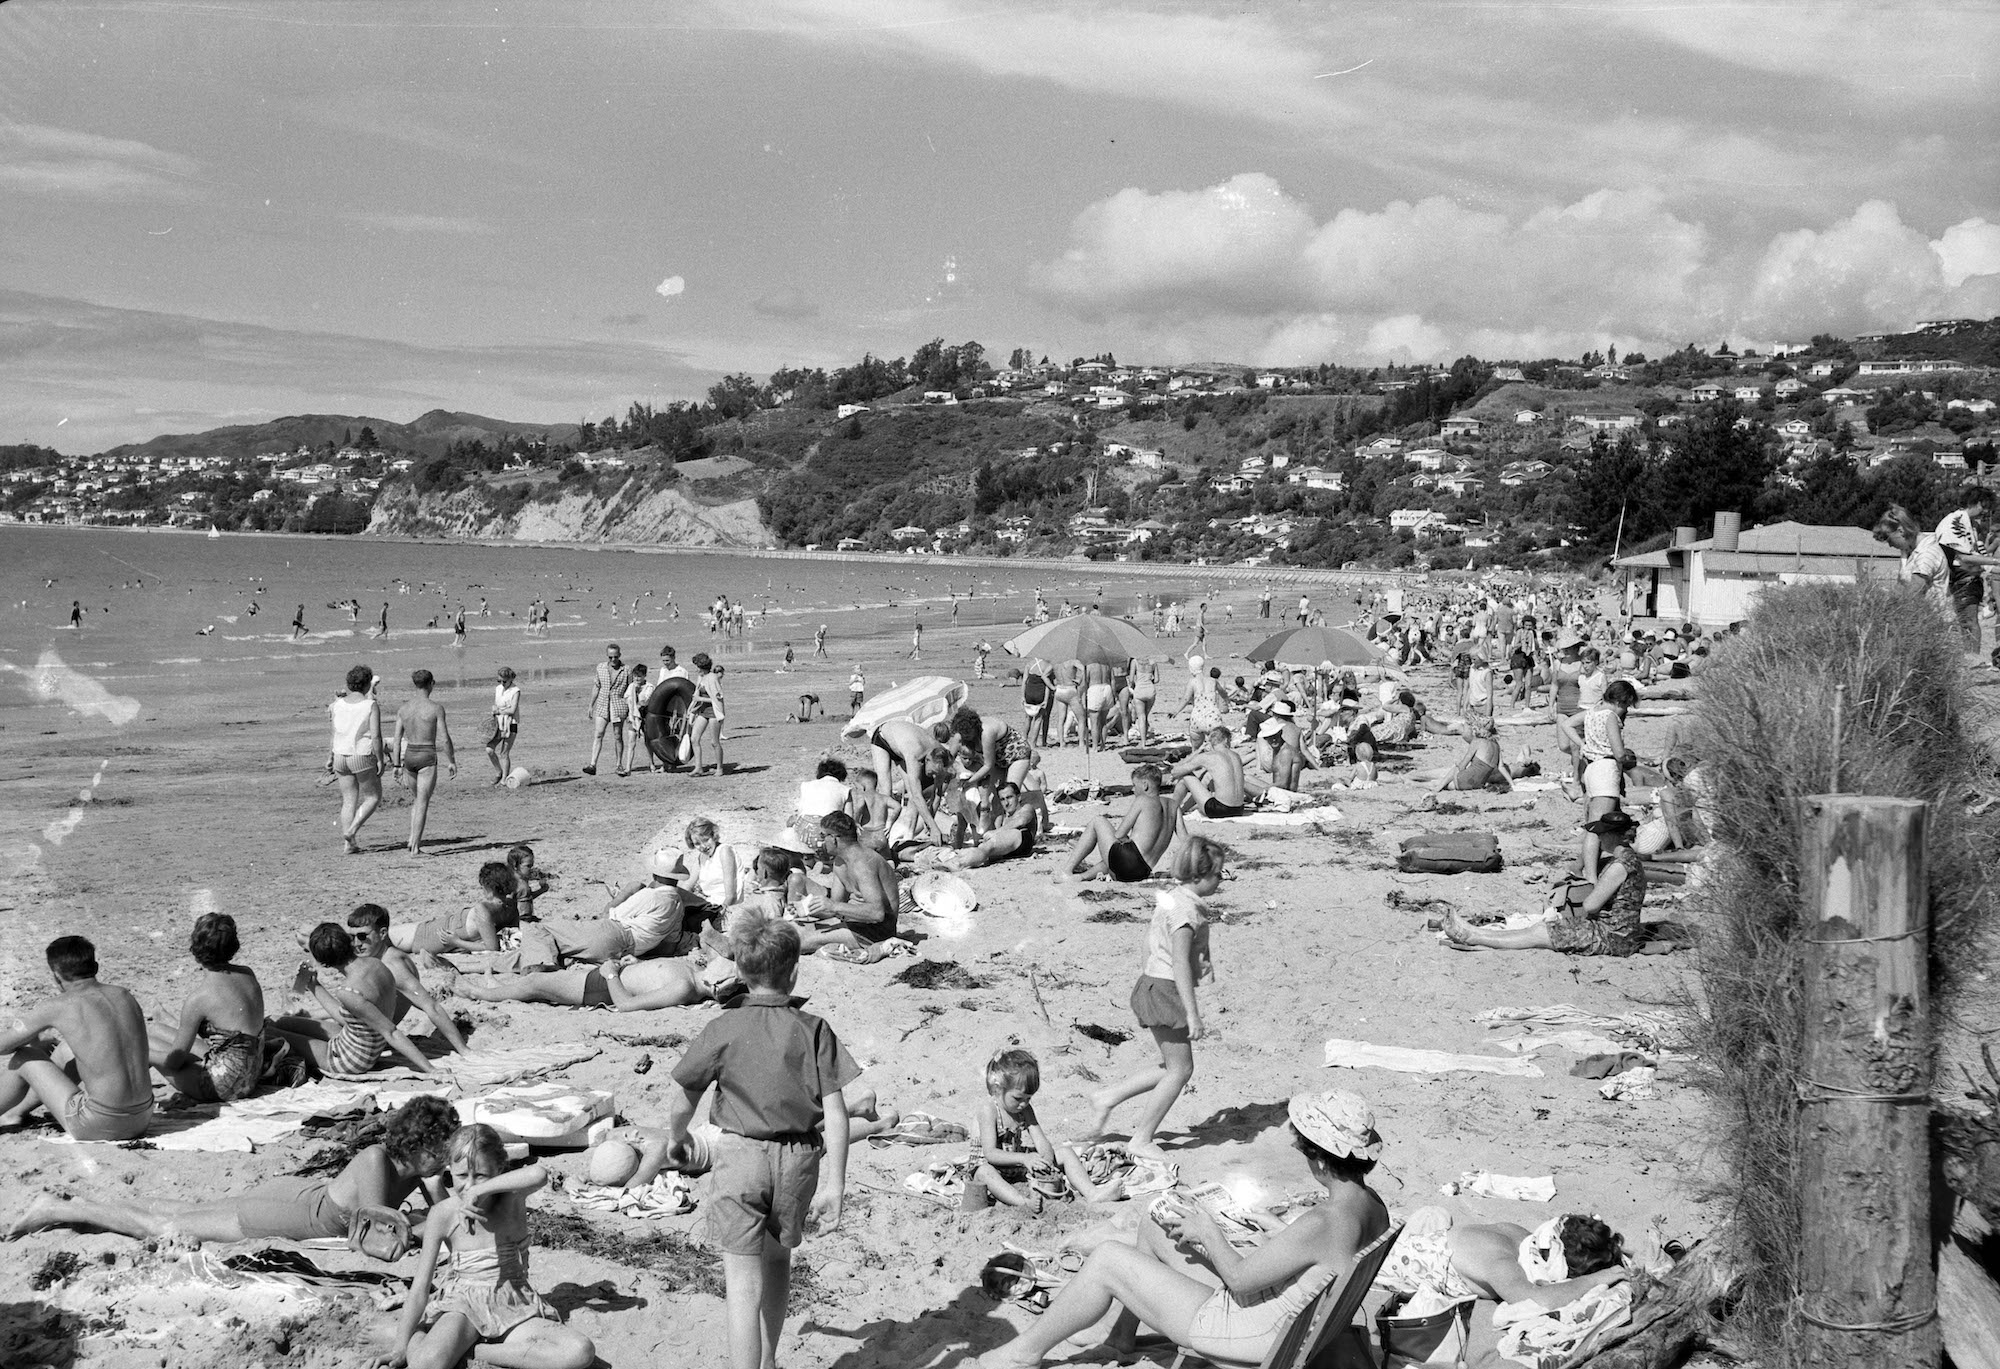 Crowd at Tahuna Beach photo courtesy Nelson Provincial Museum